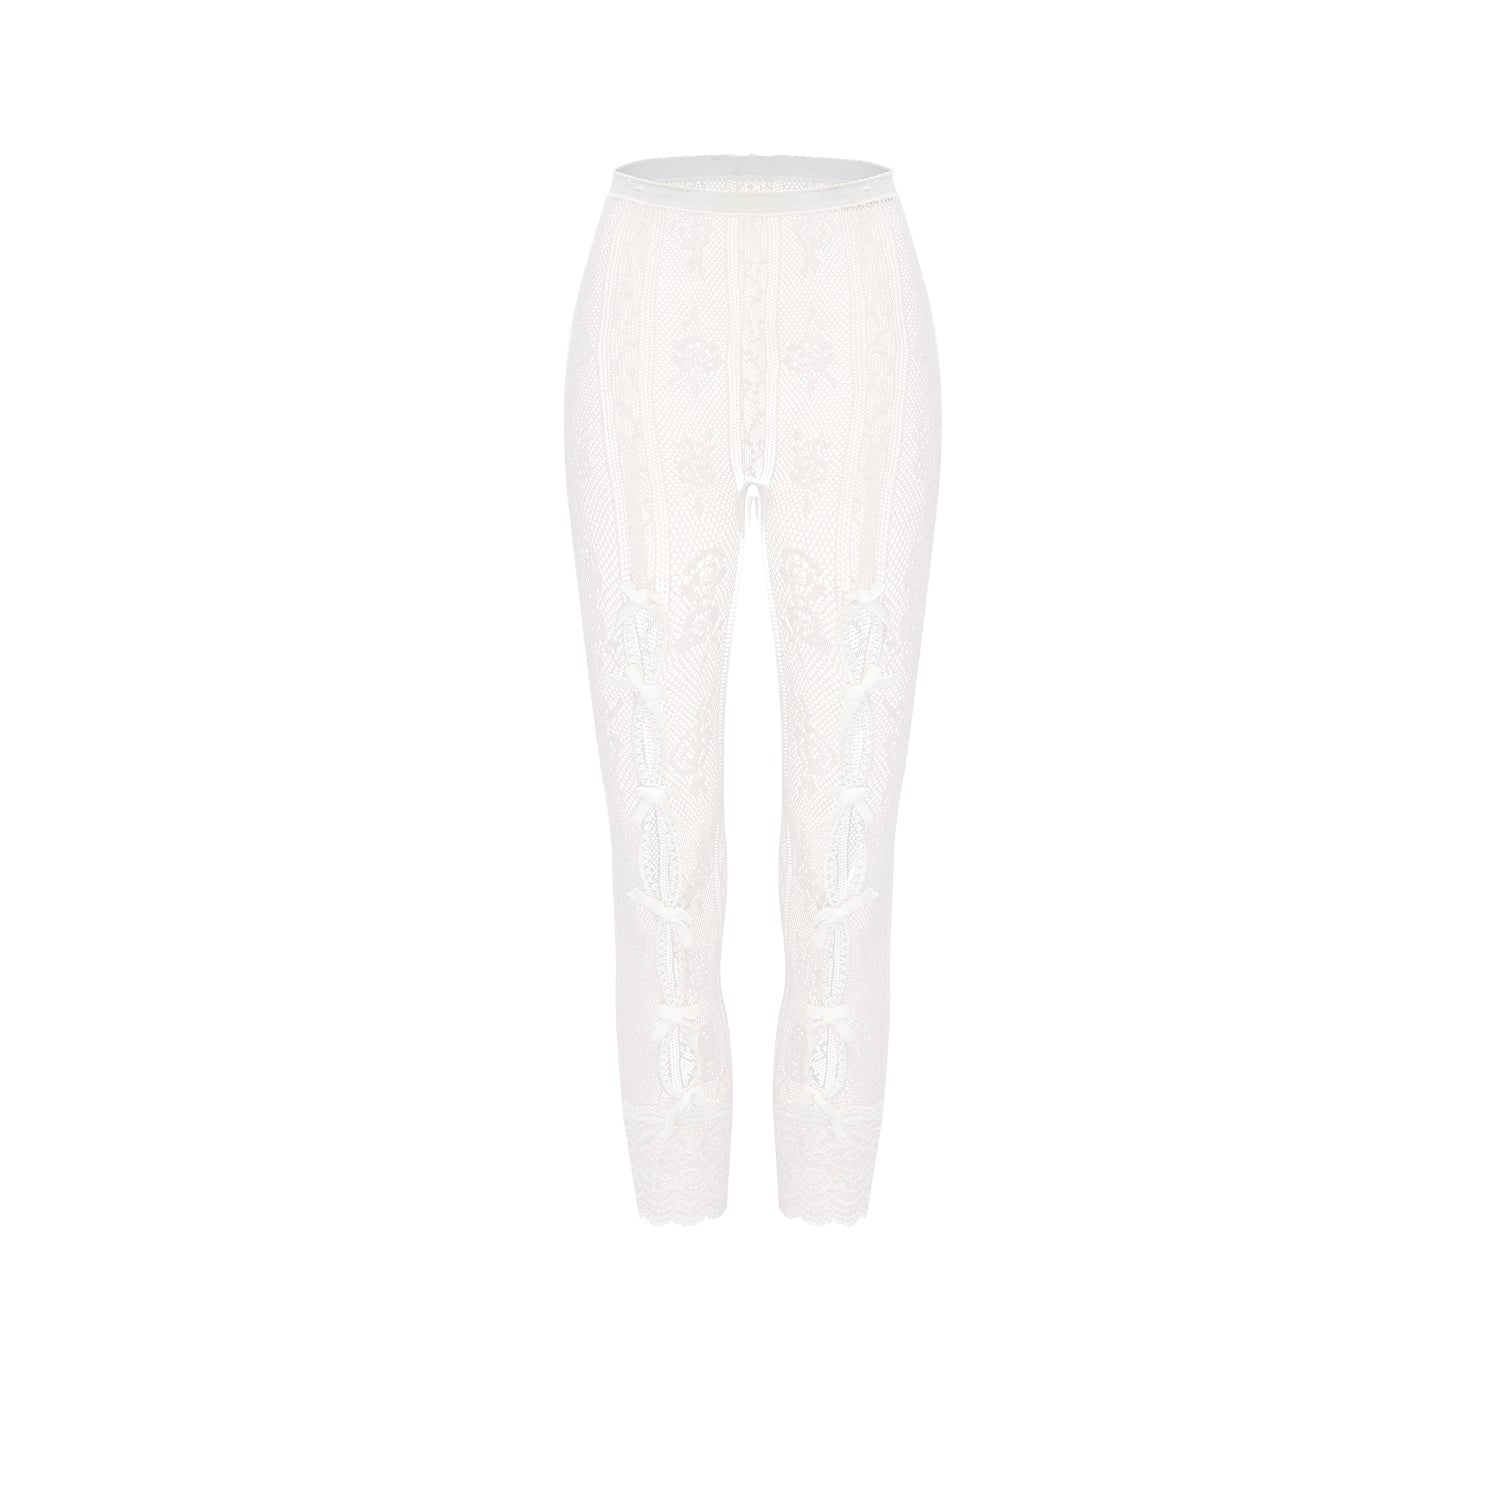 White lace cropped leggings